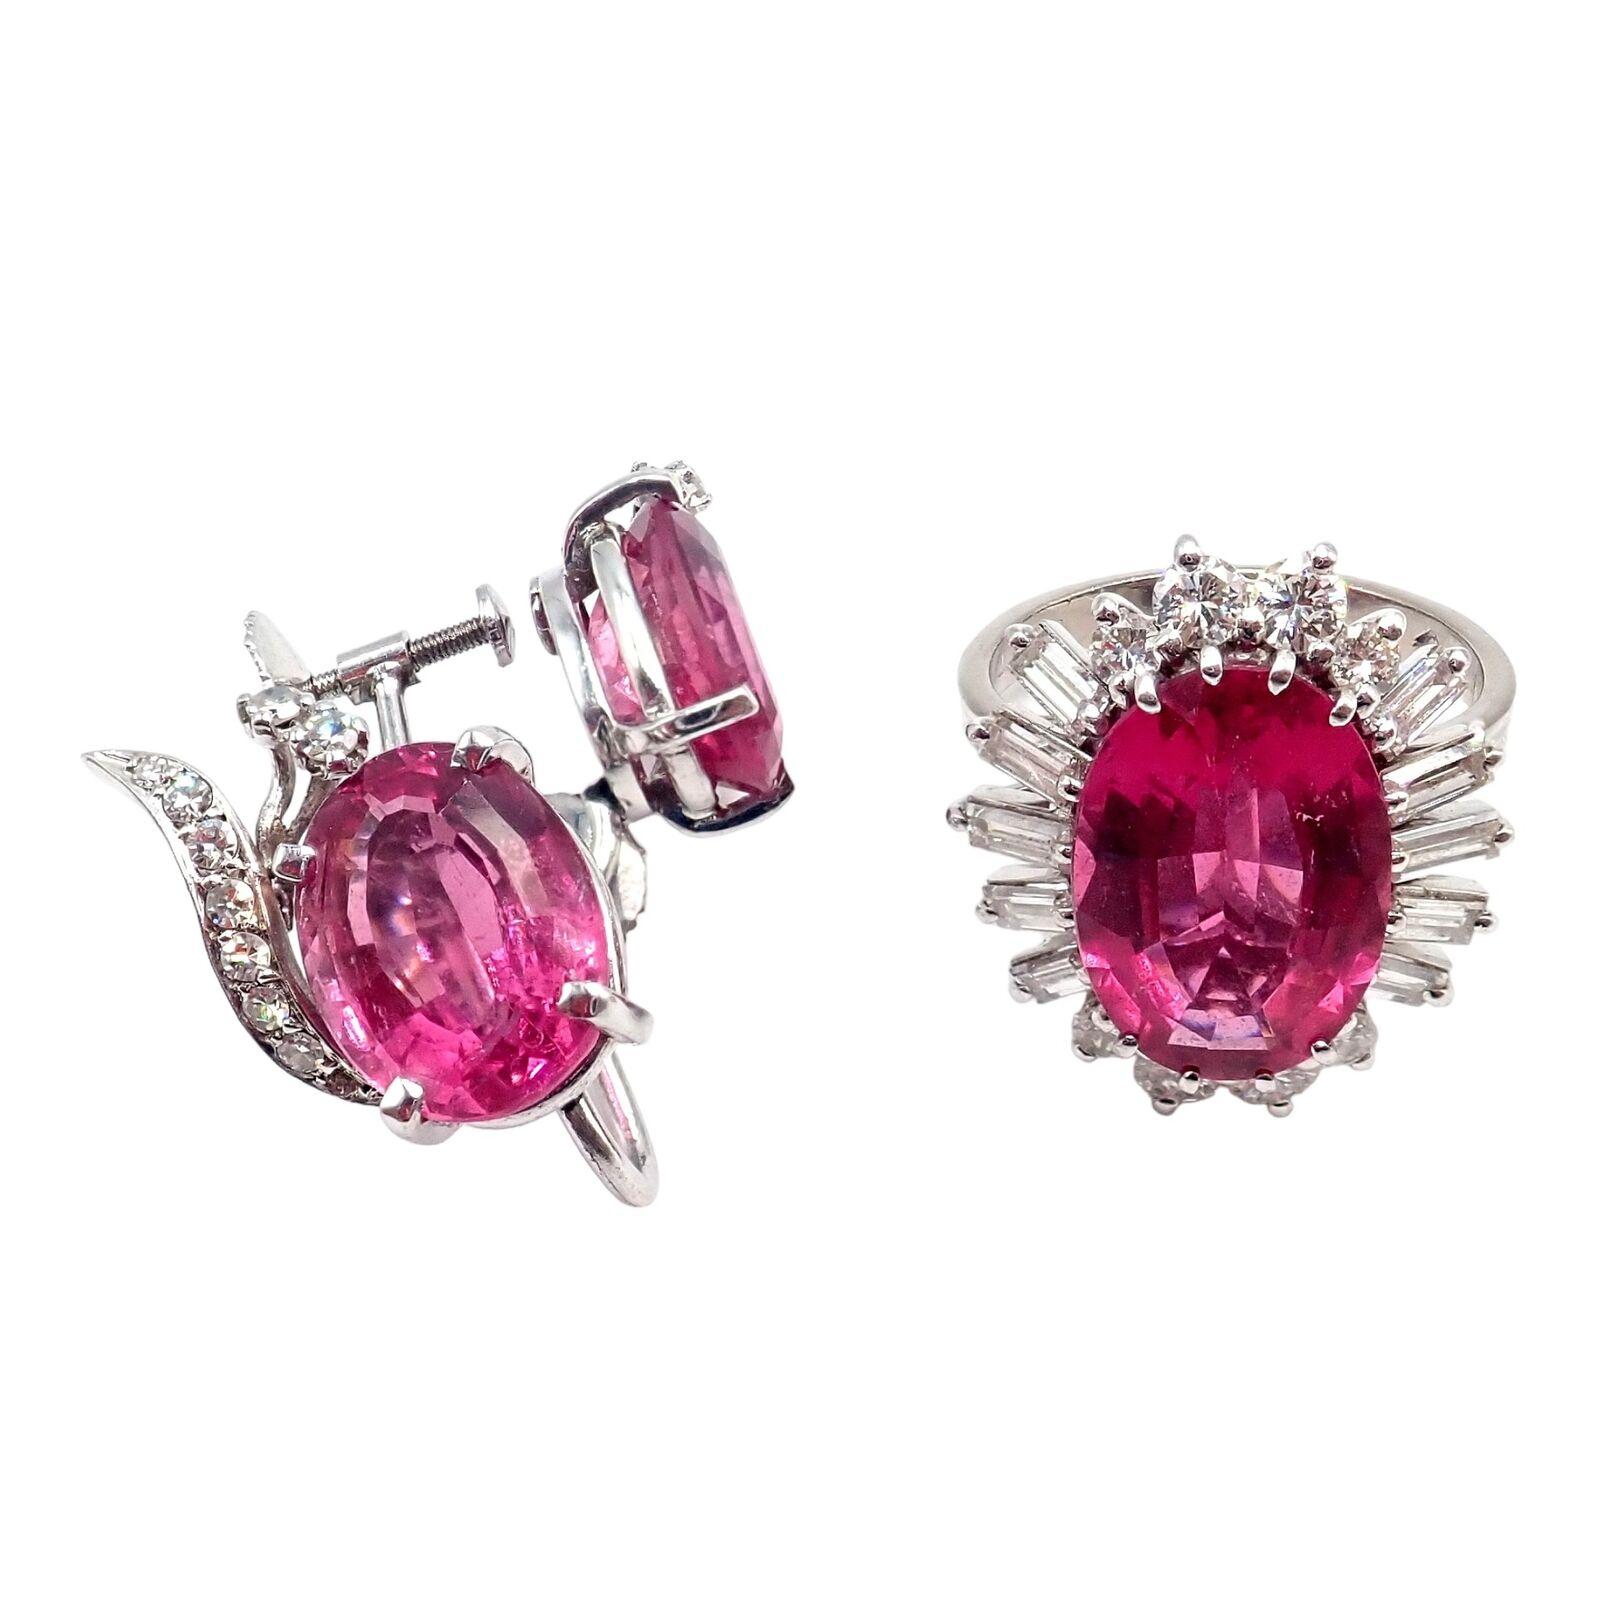 H. Stern Diamond Pink Tourmaline White Gold Ring And Earrings Set For Sale 7